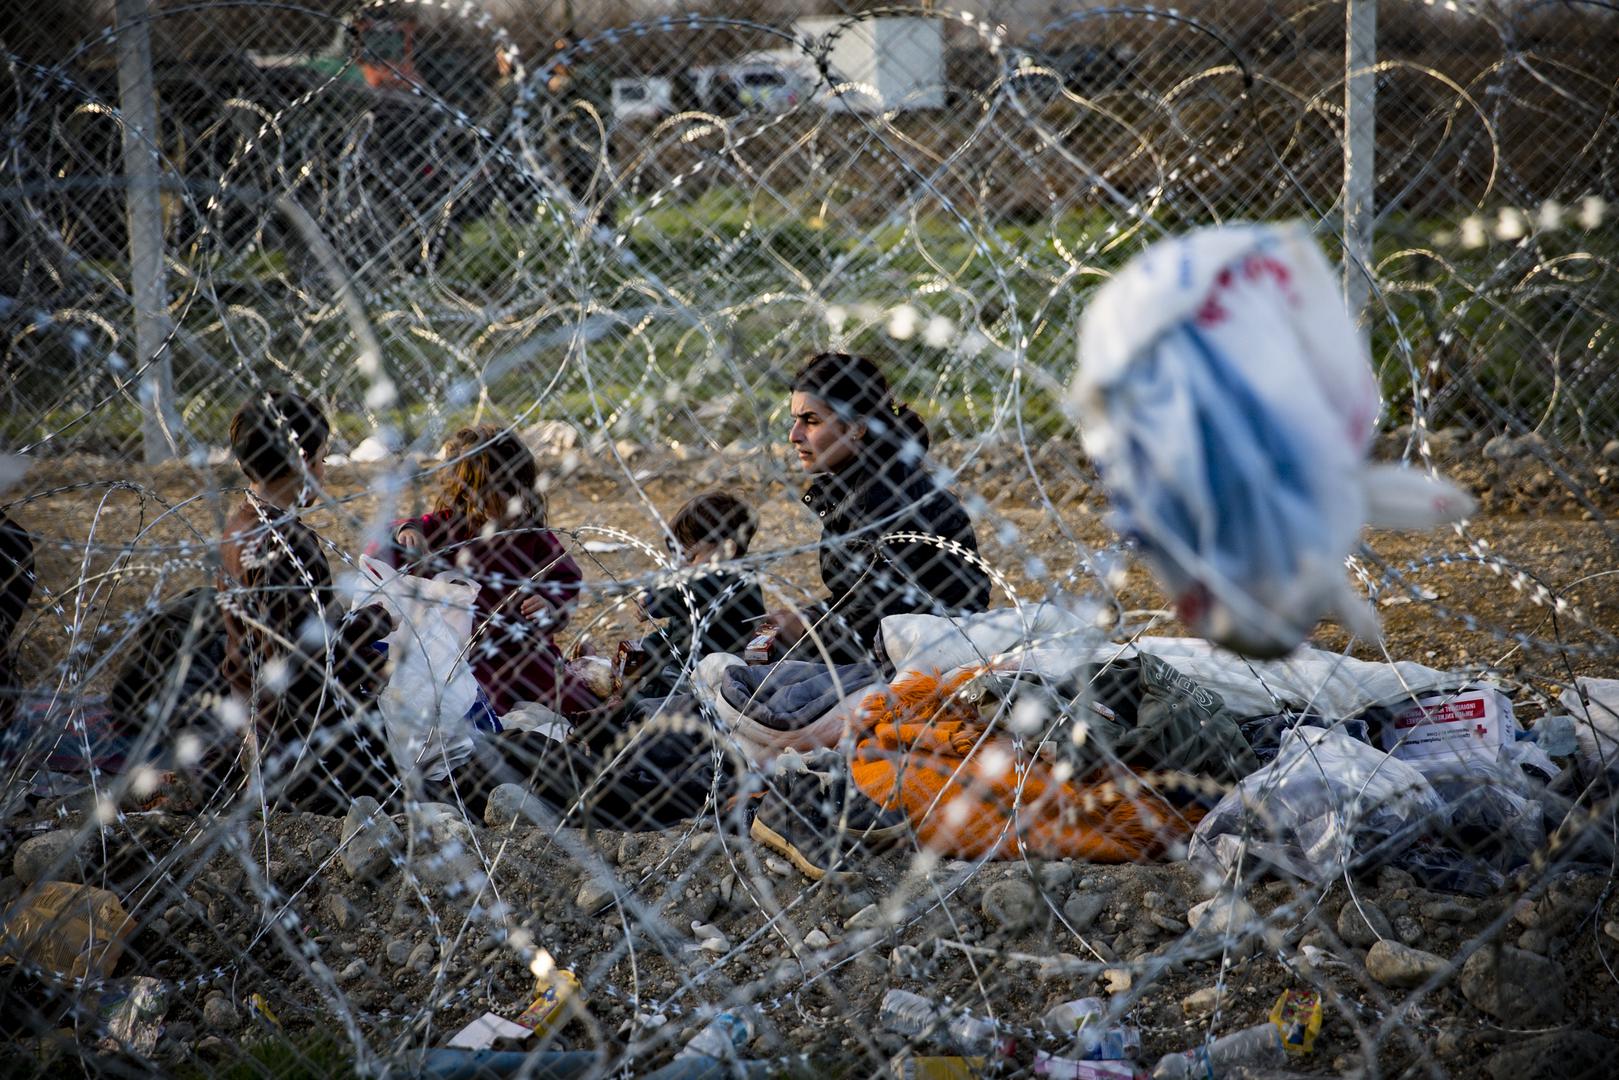 A Syrian family with children was forced by Macedonian security forces to remain in the no-man's land between Greece and Macedonia for five days without shelter after being caught trying to enter Macedonia irregularly.